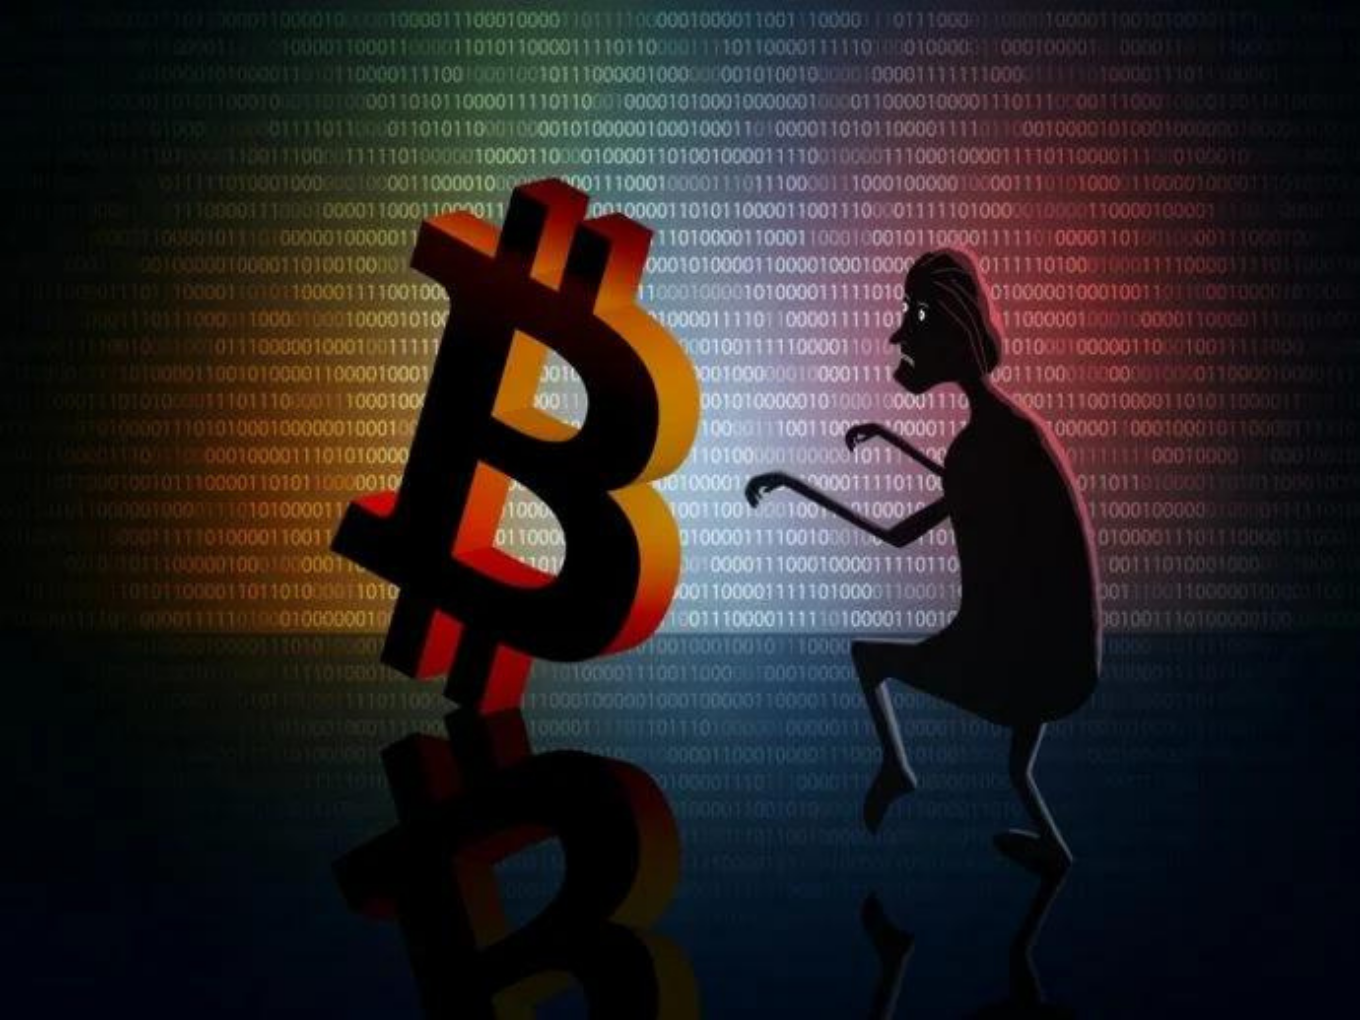 ED Seeks Info From Pune Police In INR 6 Cr Bitcoin Fraud Case